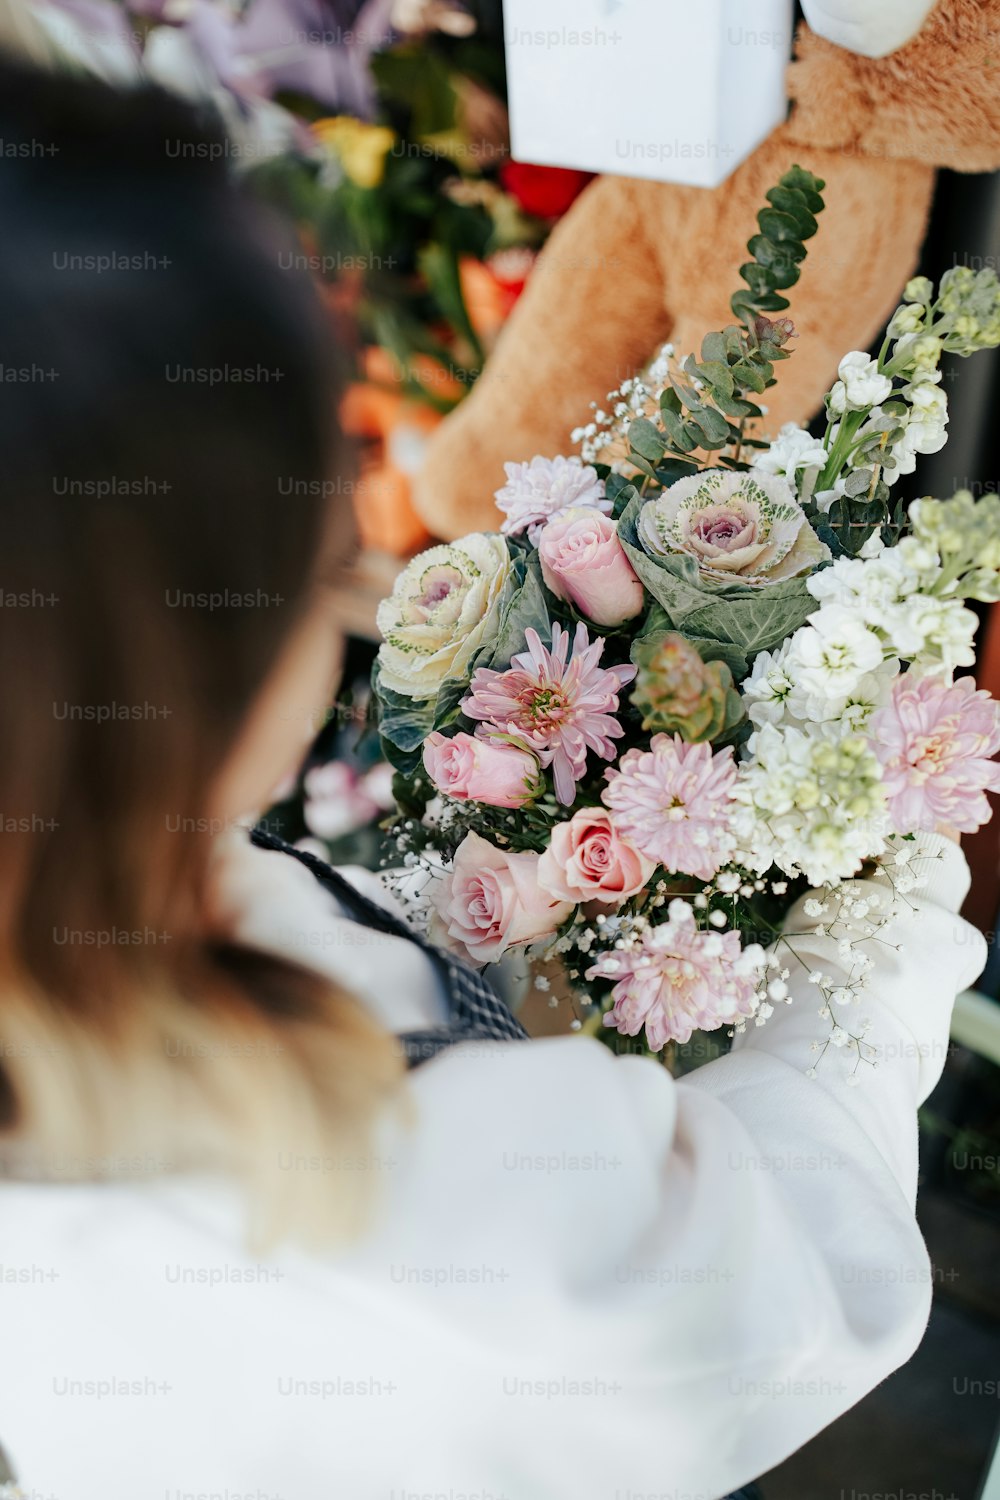 a woman holding a bouquet of flowers in front of a teddy bear